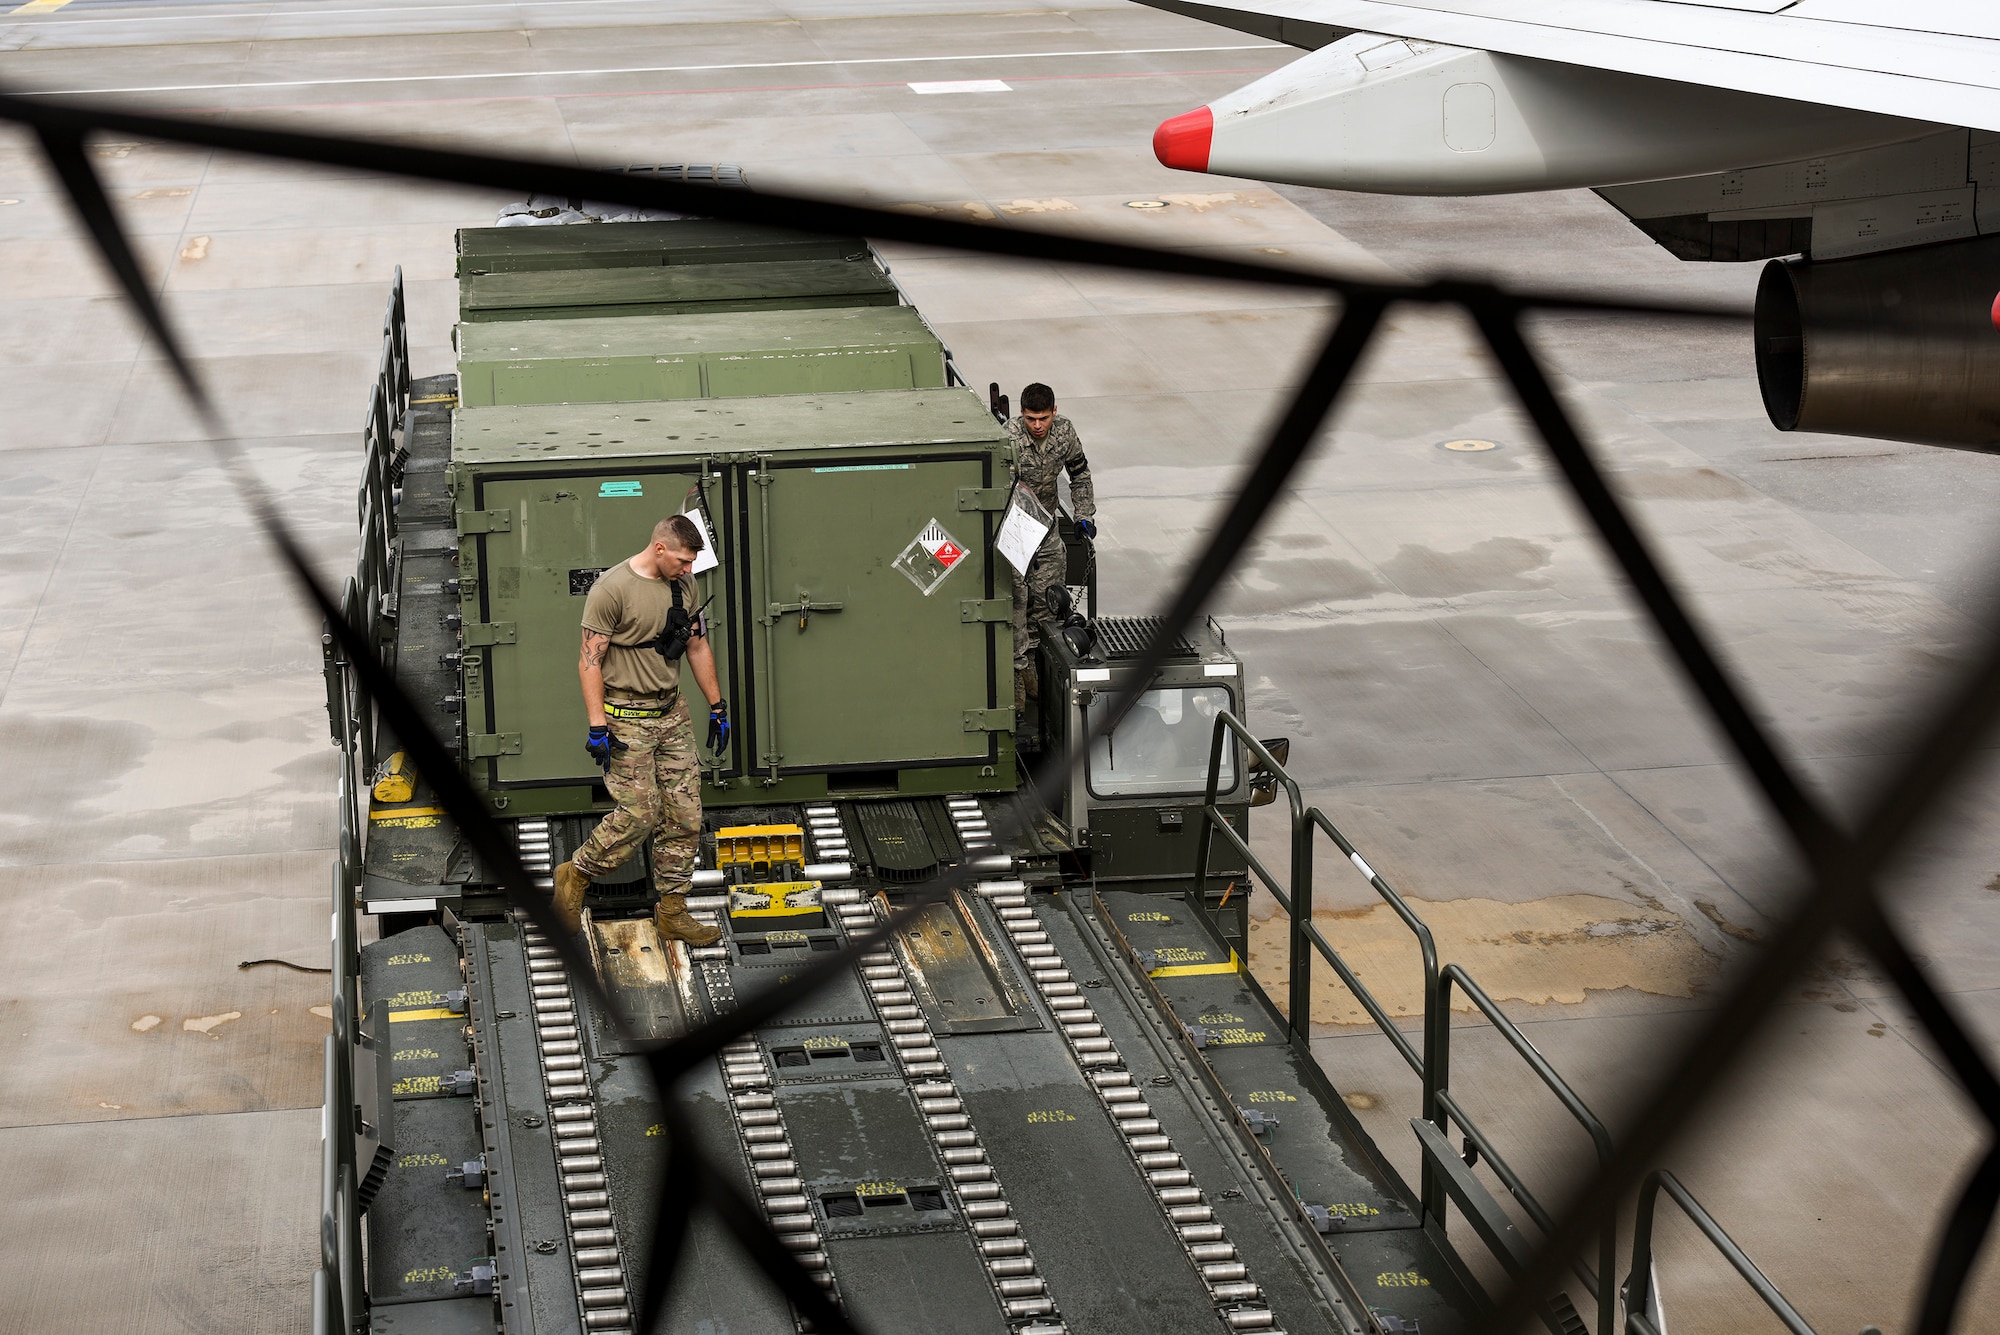 Staff Sgt. Daniel Lauritzen, 728th Air Mobility Squadron aircraft services supervisor, and Senior Airman Dane Johnson, 728th AMS aircraft services journeyman, unload cargo from a K-Loader March 3, 2019, at Incirlik Air Base, Turkey. Airmen in the 728th AMS use K-loaders to offload and download thousands of pounds of cargo weekly. (U.S. Air Force photo by Staff Sgt. Ceaira Tinsley)